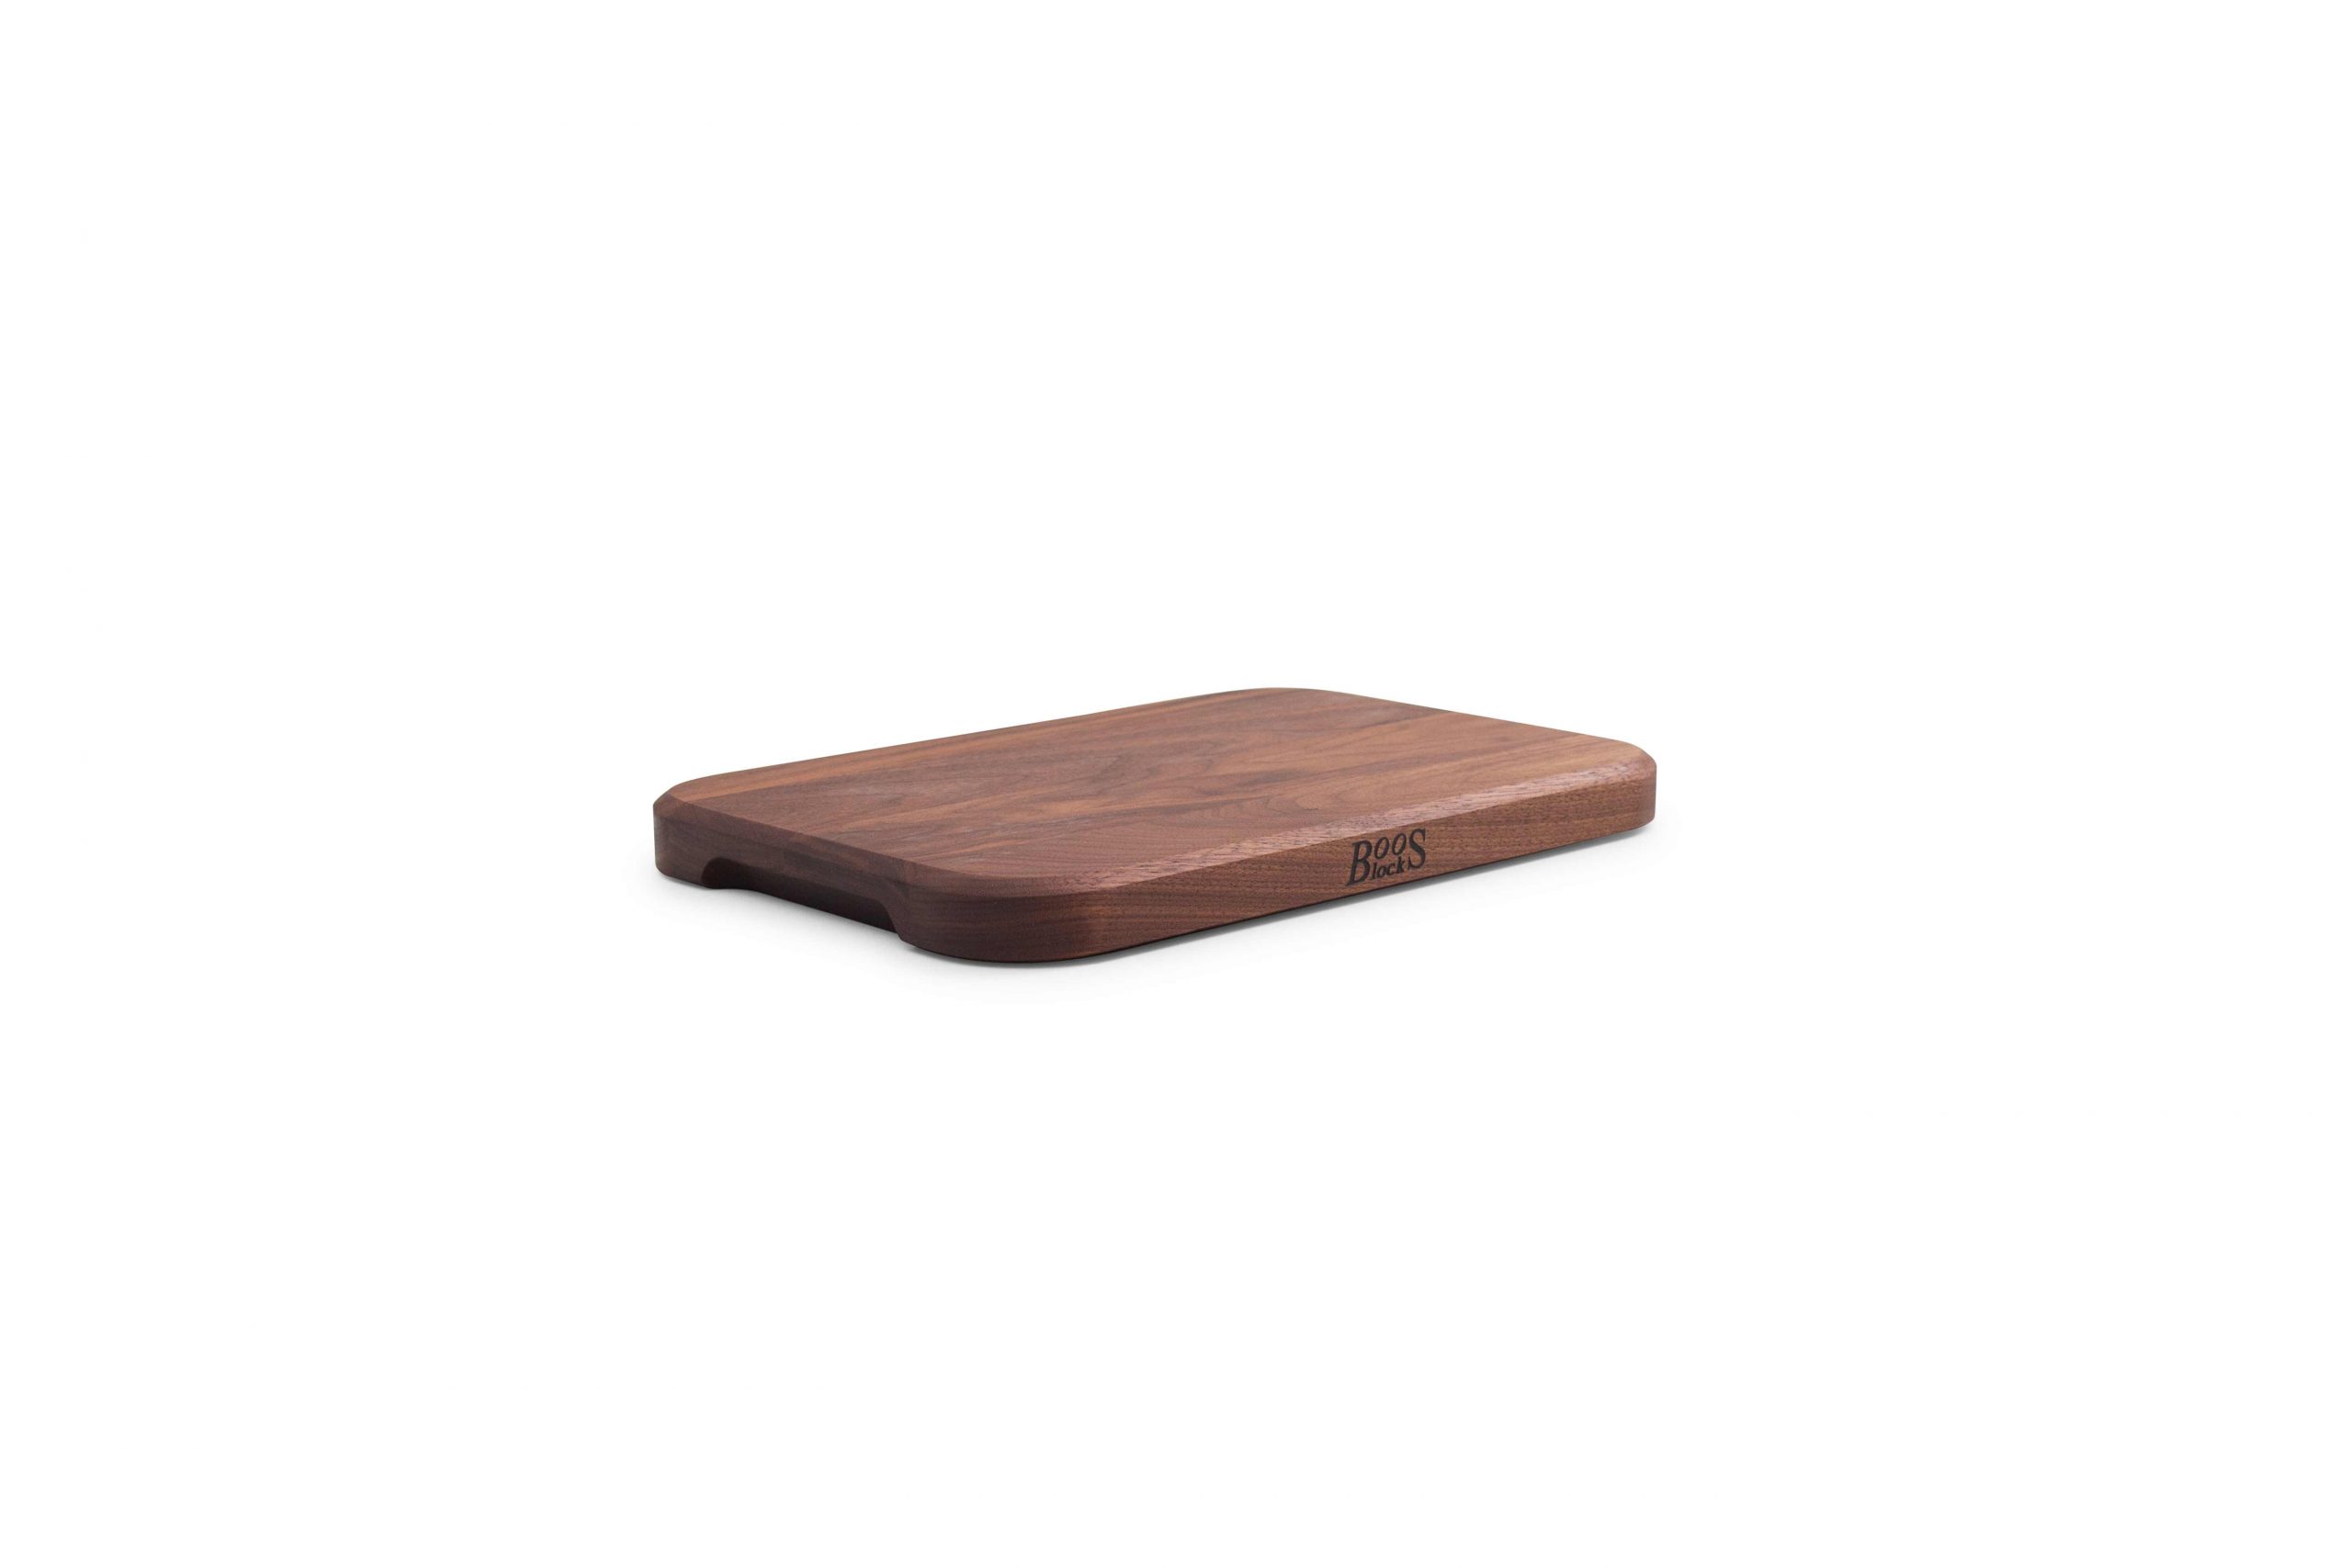 Chop-N-Serve Black Walnut cutting board with recessed handles; can be used on both sides 7